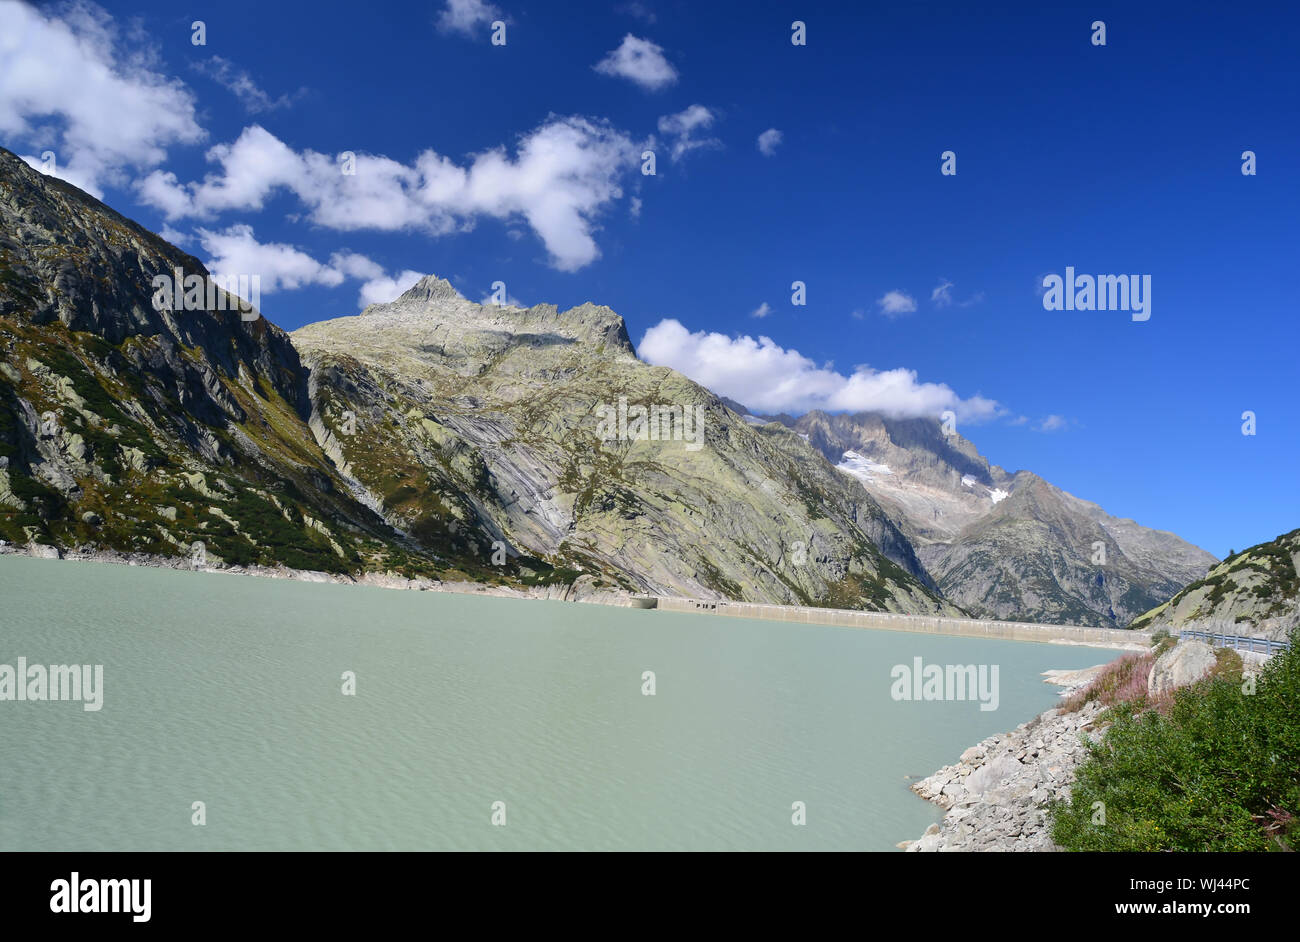 The Alplistock above the Raterichsbodensee just below the Grimsel Pass in central Switzerland. Part of the Bernese Alps Stock Photo